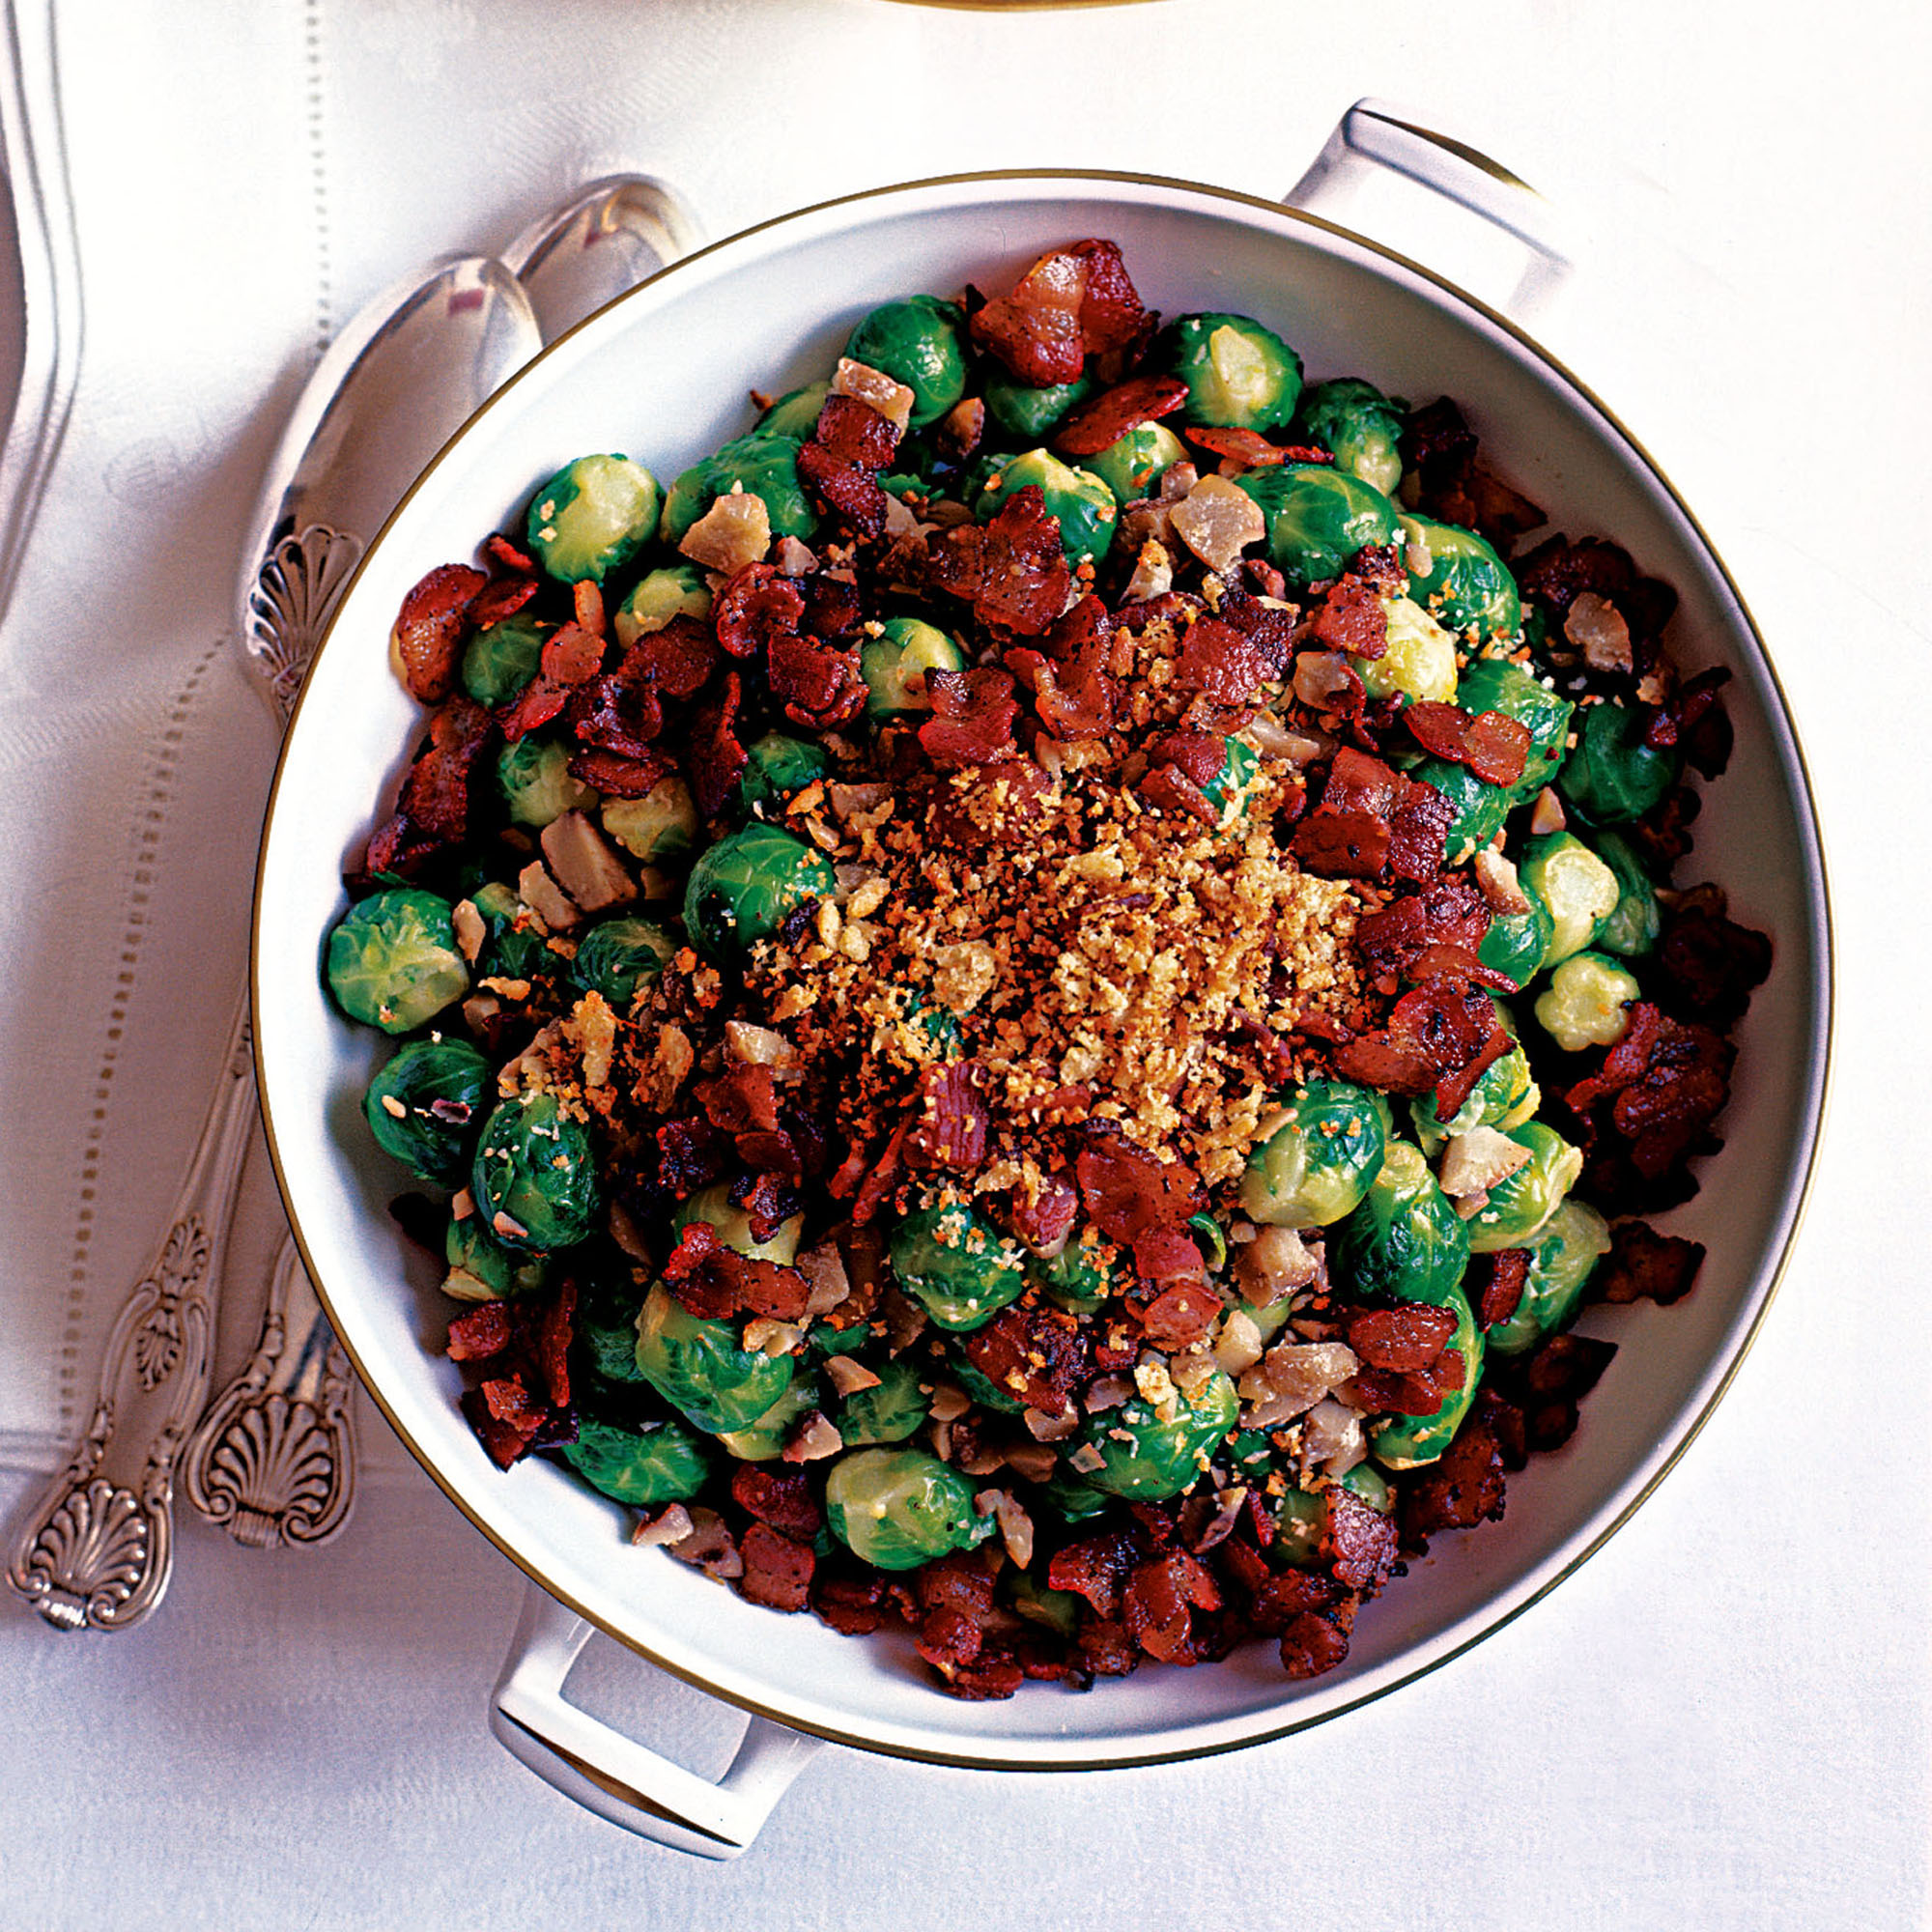 Sprouts With Crunchy Bacon, Chestnuts And Buttered Garlic Crumbs Recipe